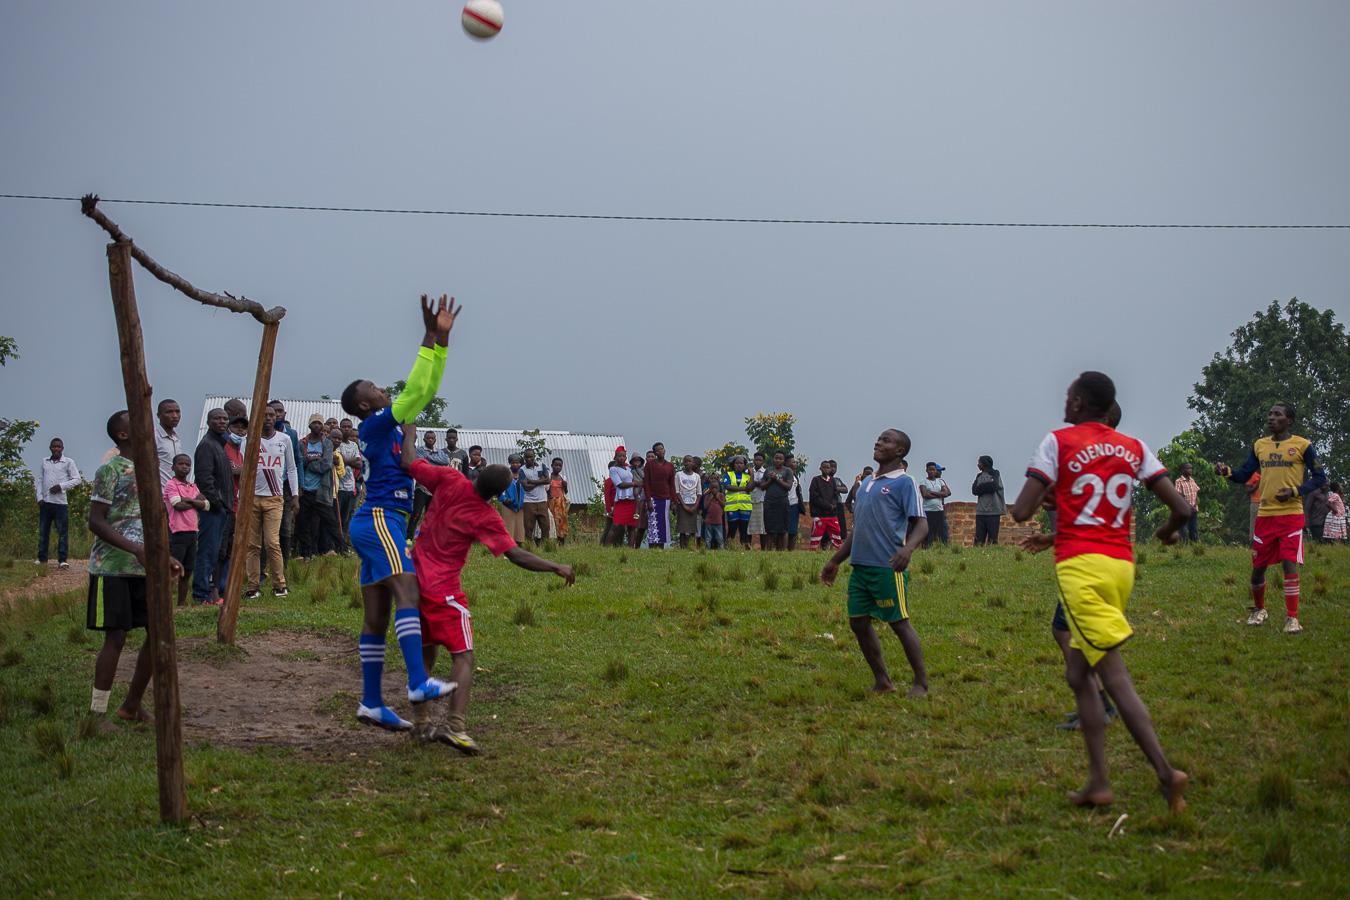 The Politics of a Scientific Campaign ( DSLR Camera Version) - A goalkeeper reaches for the ball as an opposing striker challenges him. Self-induced crowds like...